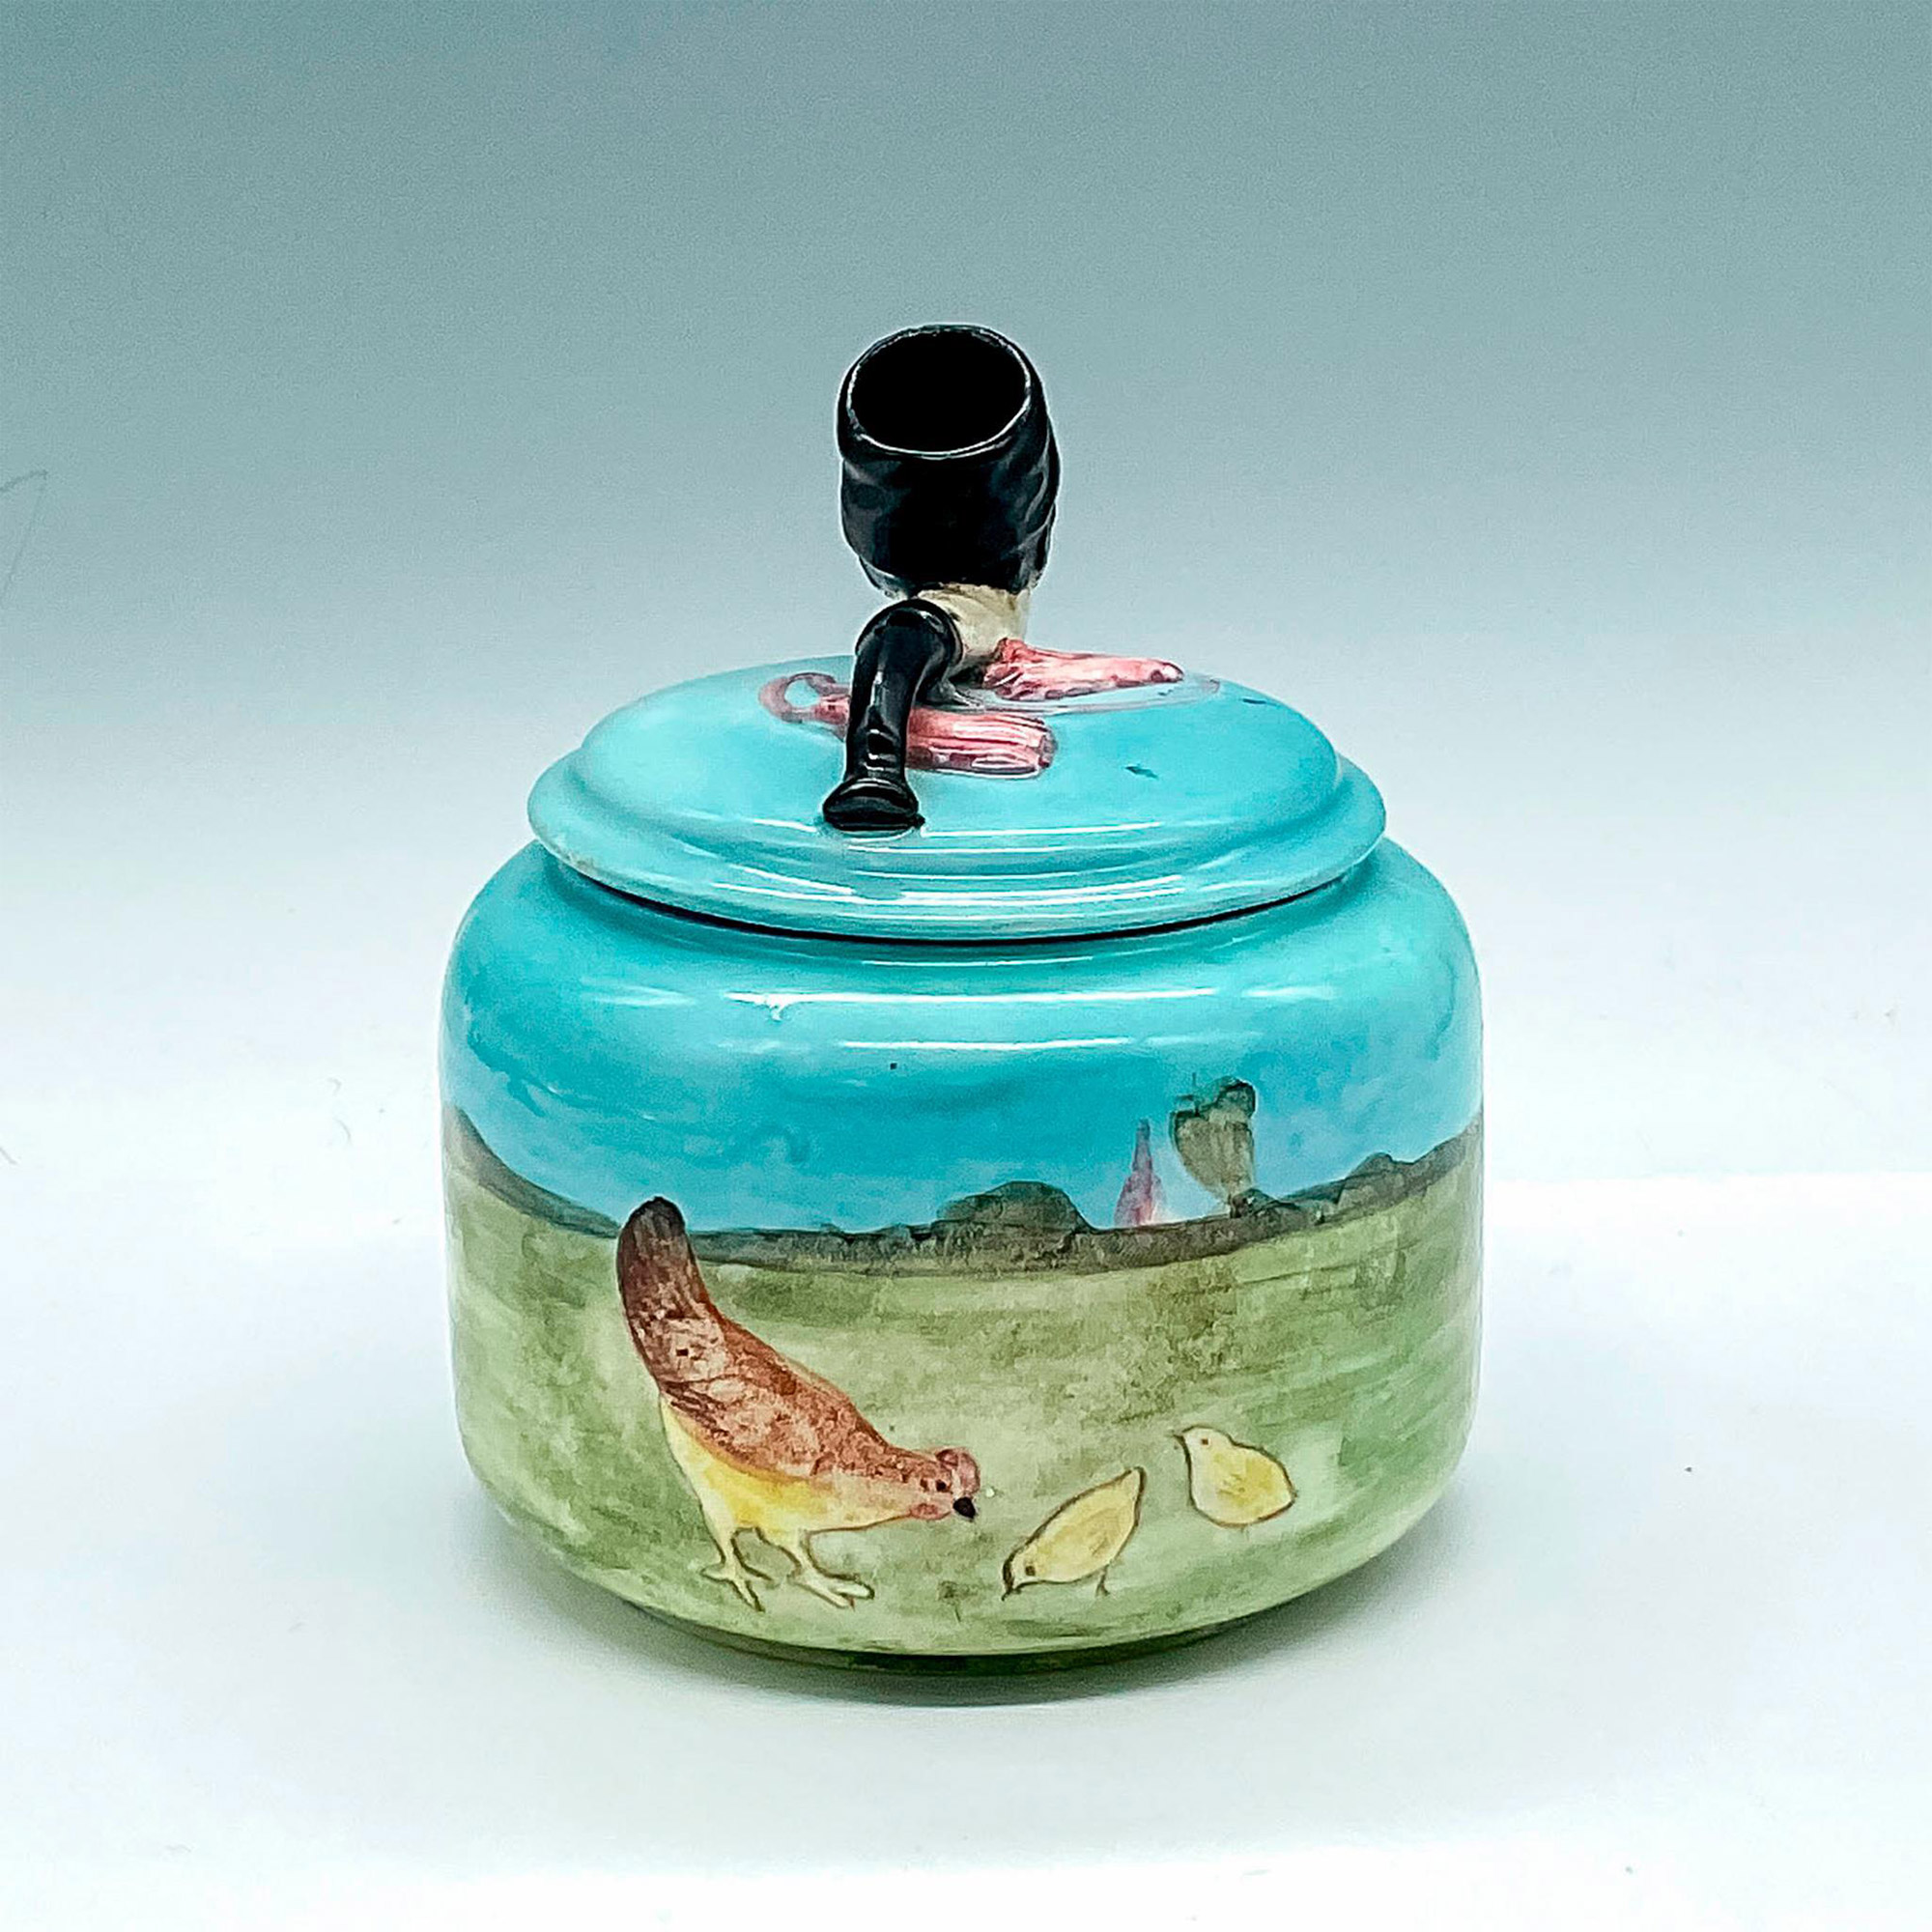 Vintage Dutch Ceramic Tobacco Jar with Cover - Image 2 of 3